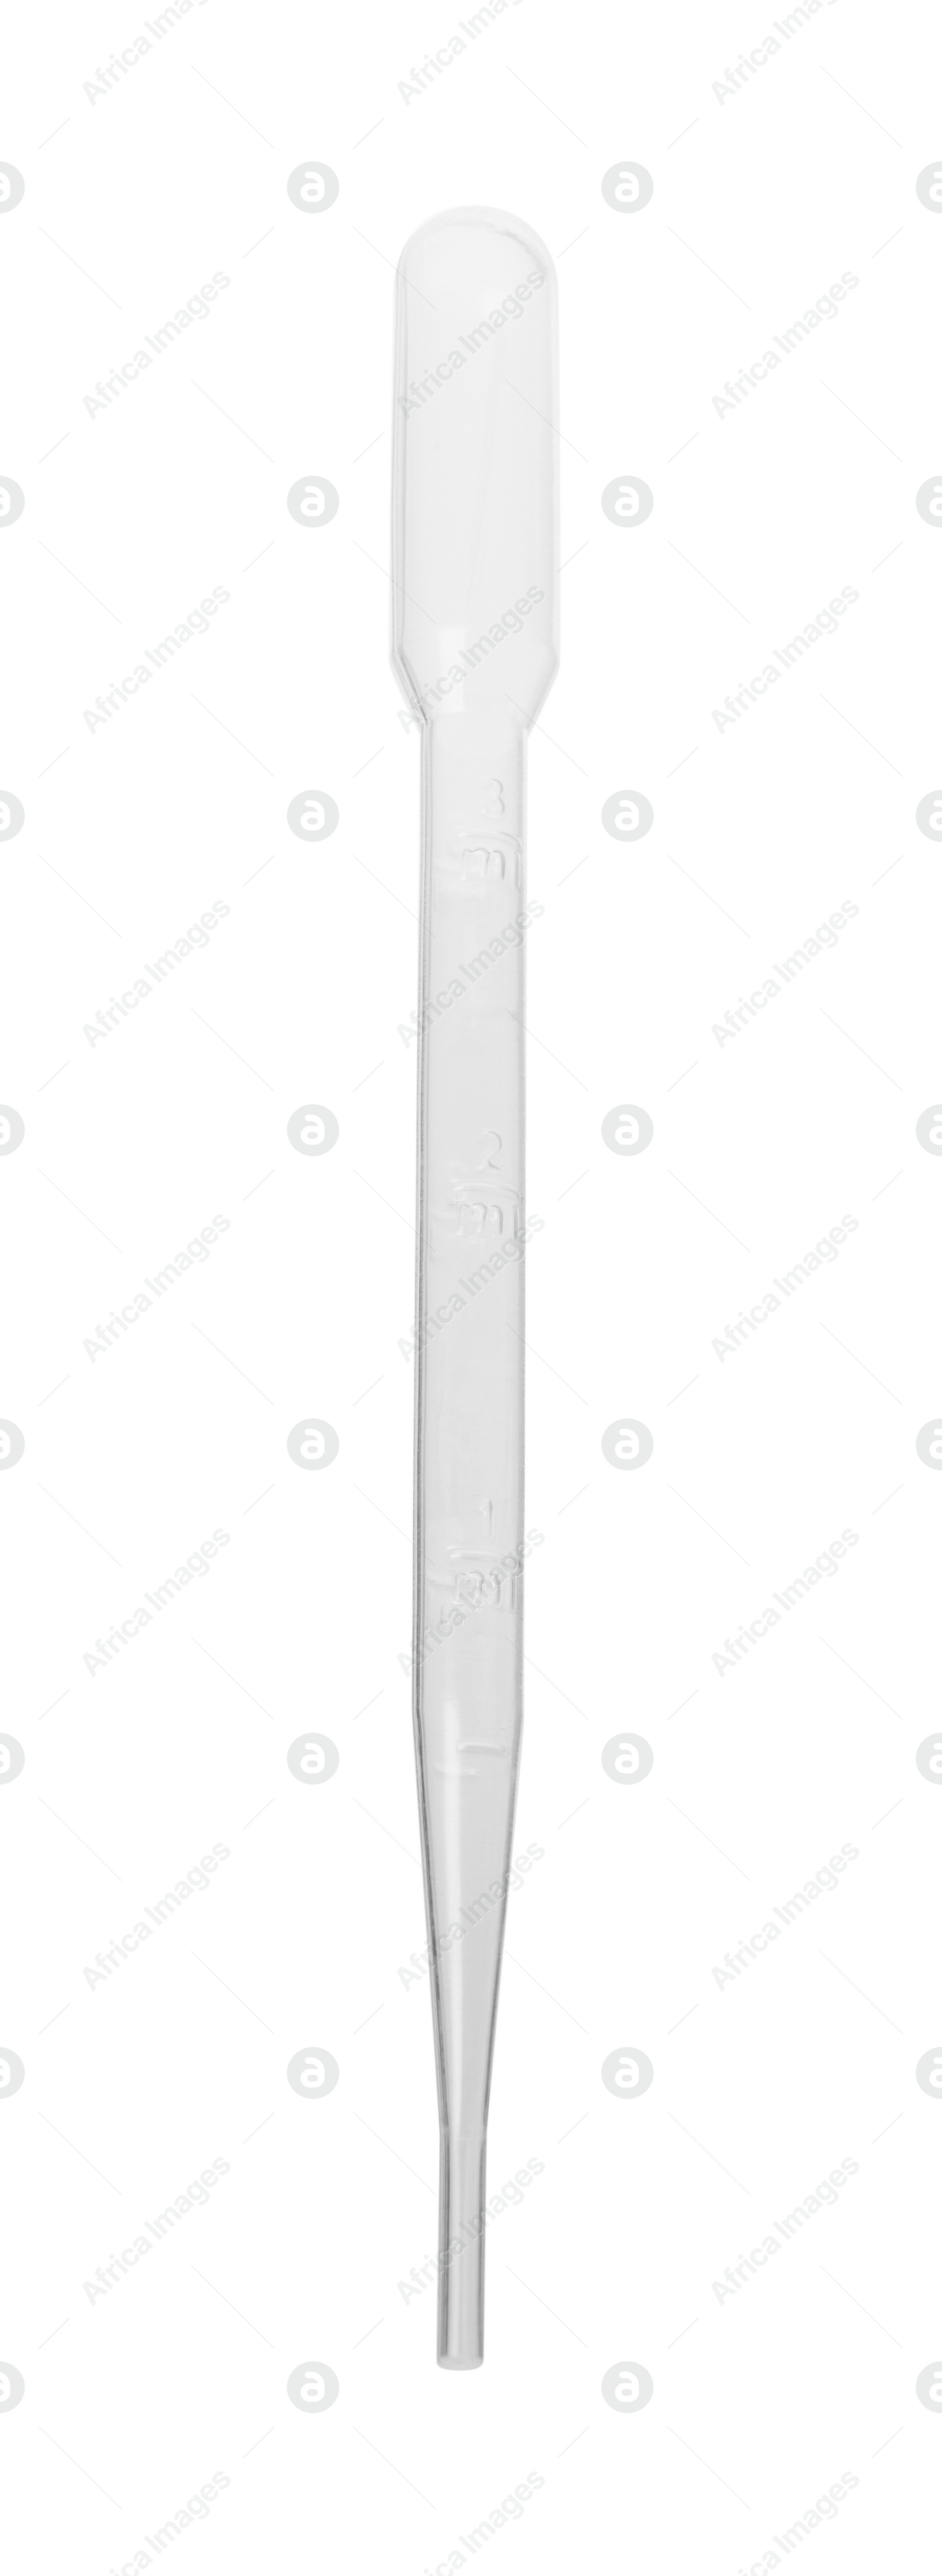 Photo of One clean transfer pipette isolated on white